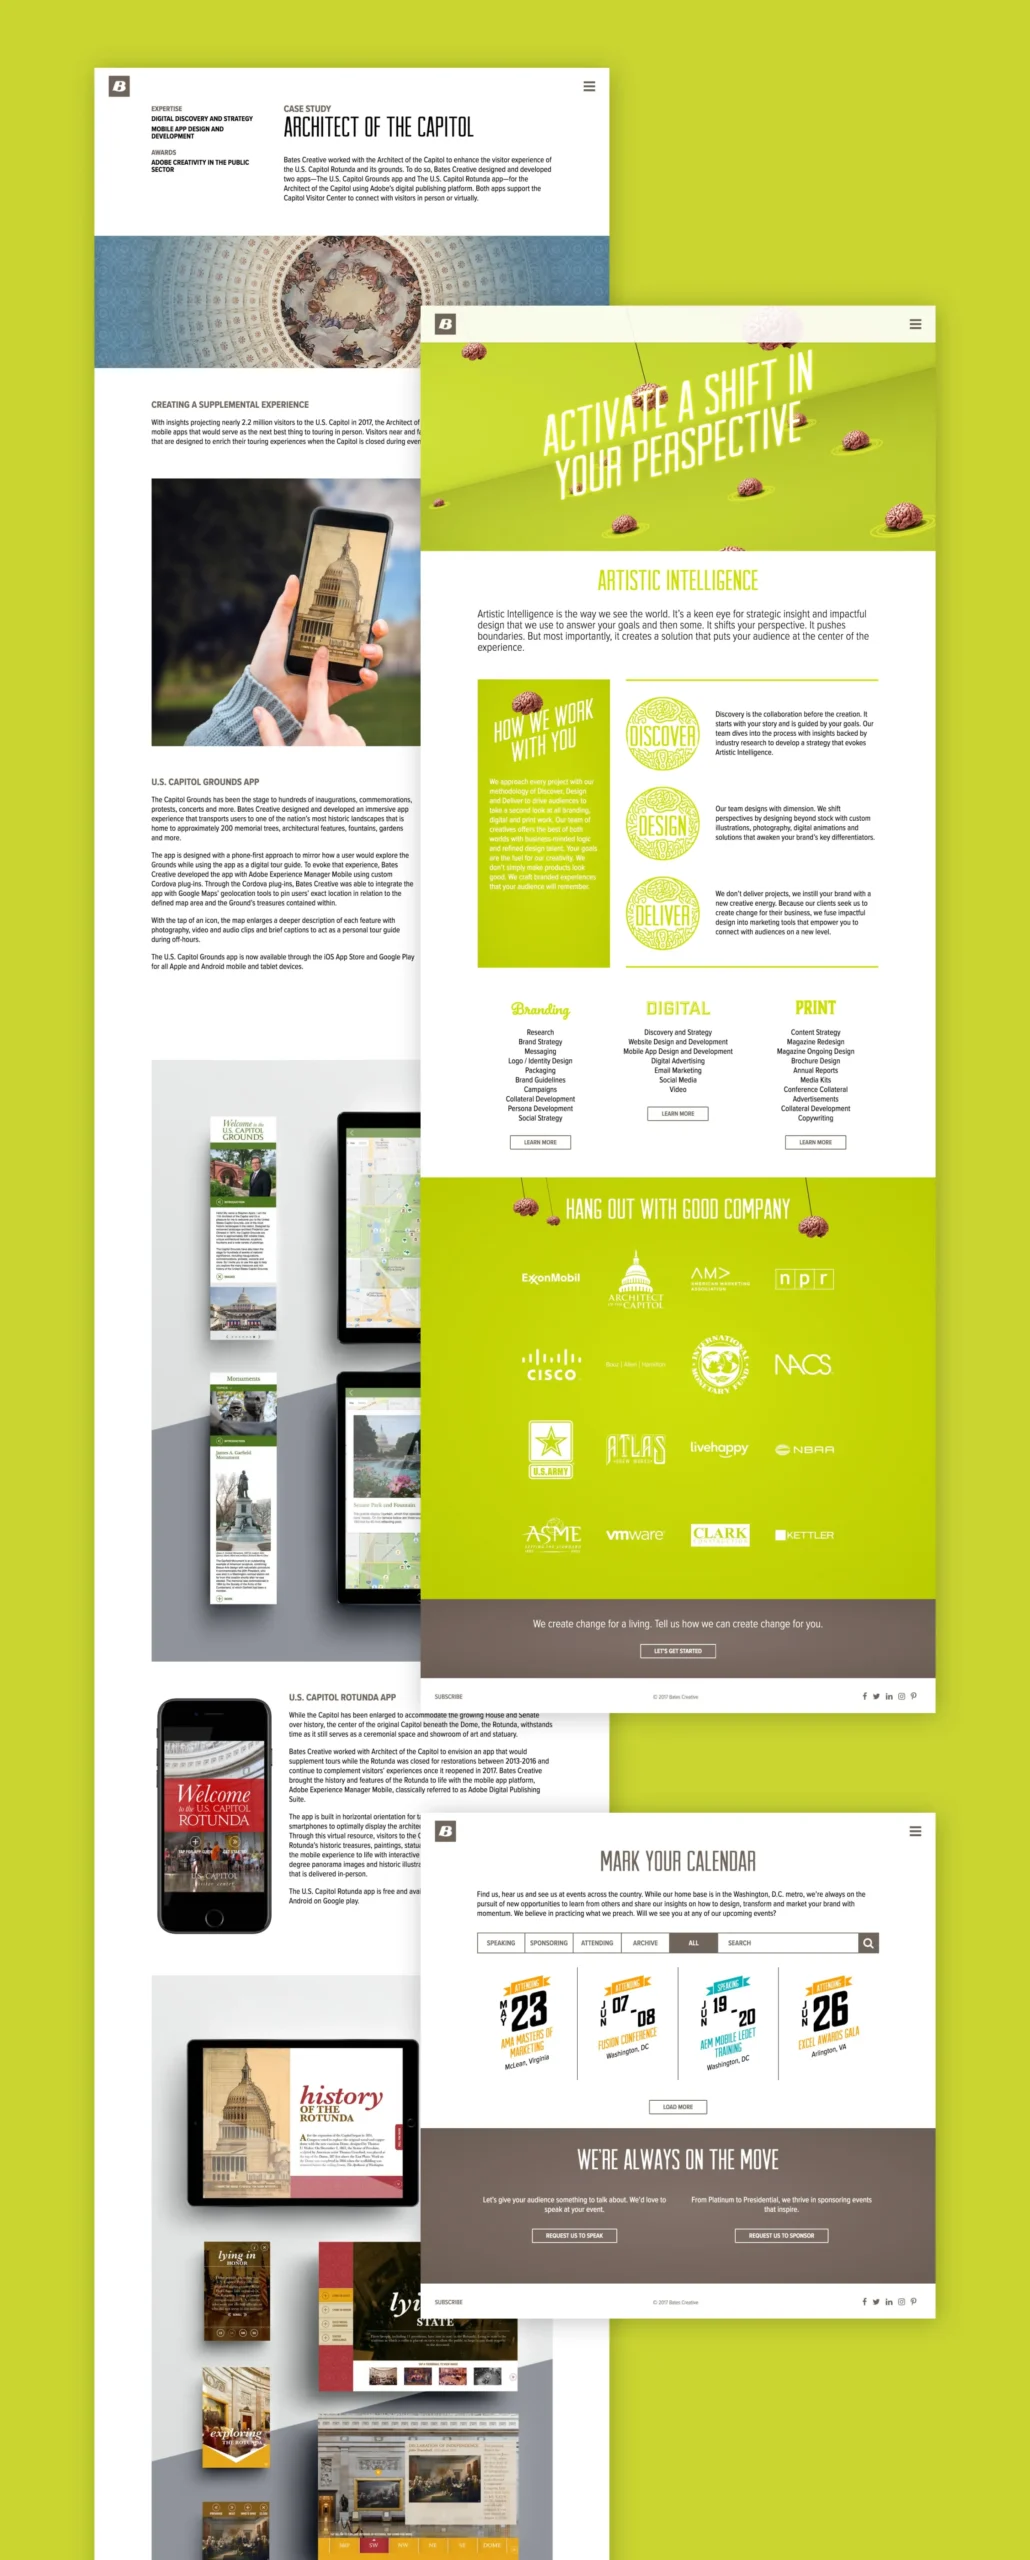 Sample pages from the Bates Creative website shown overlapping, in desktop view